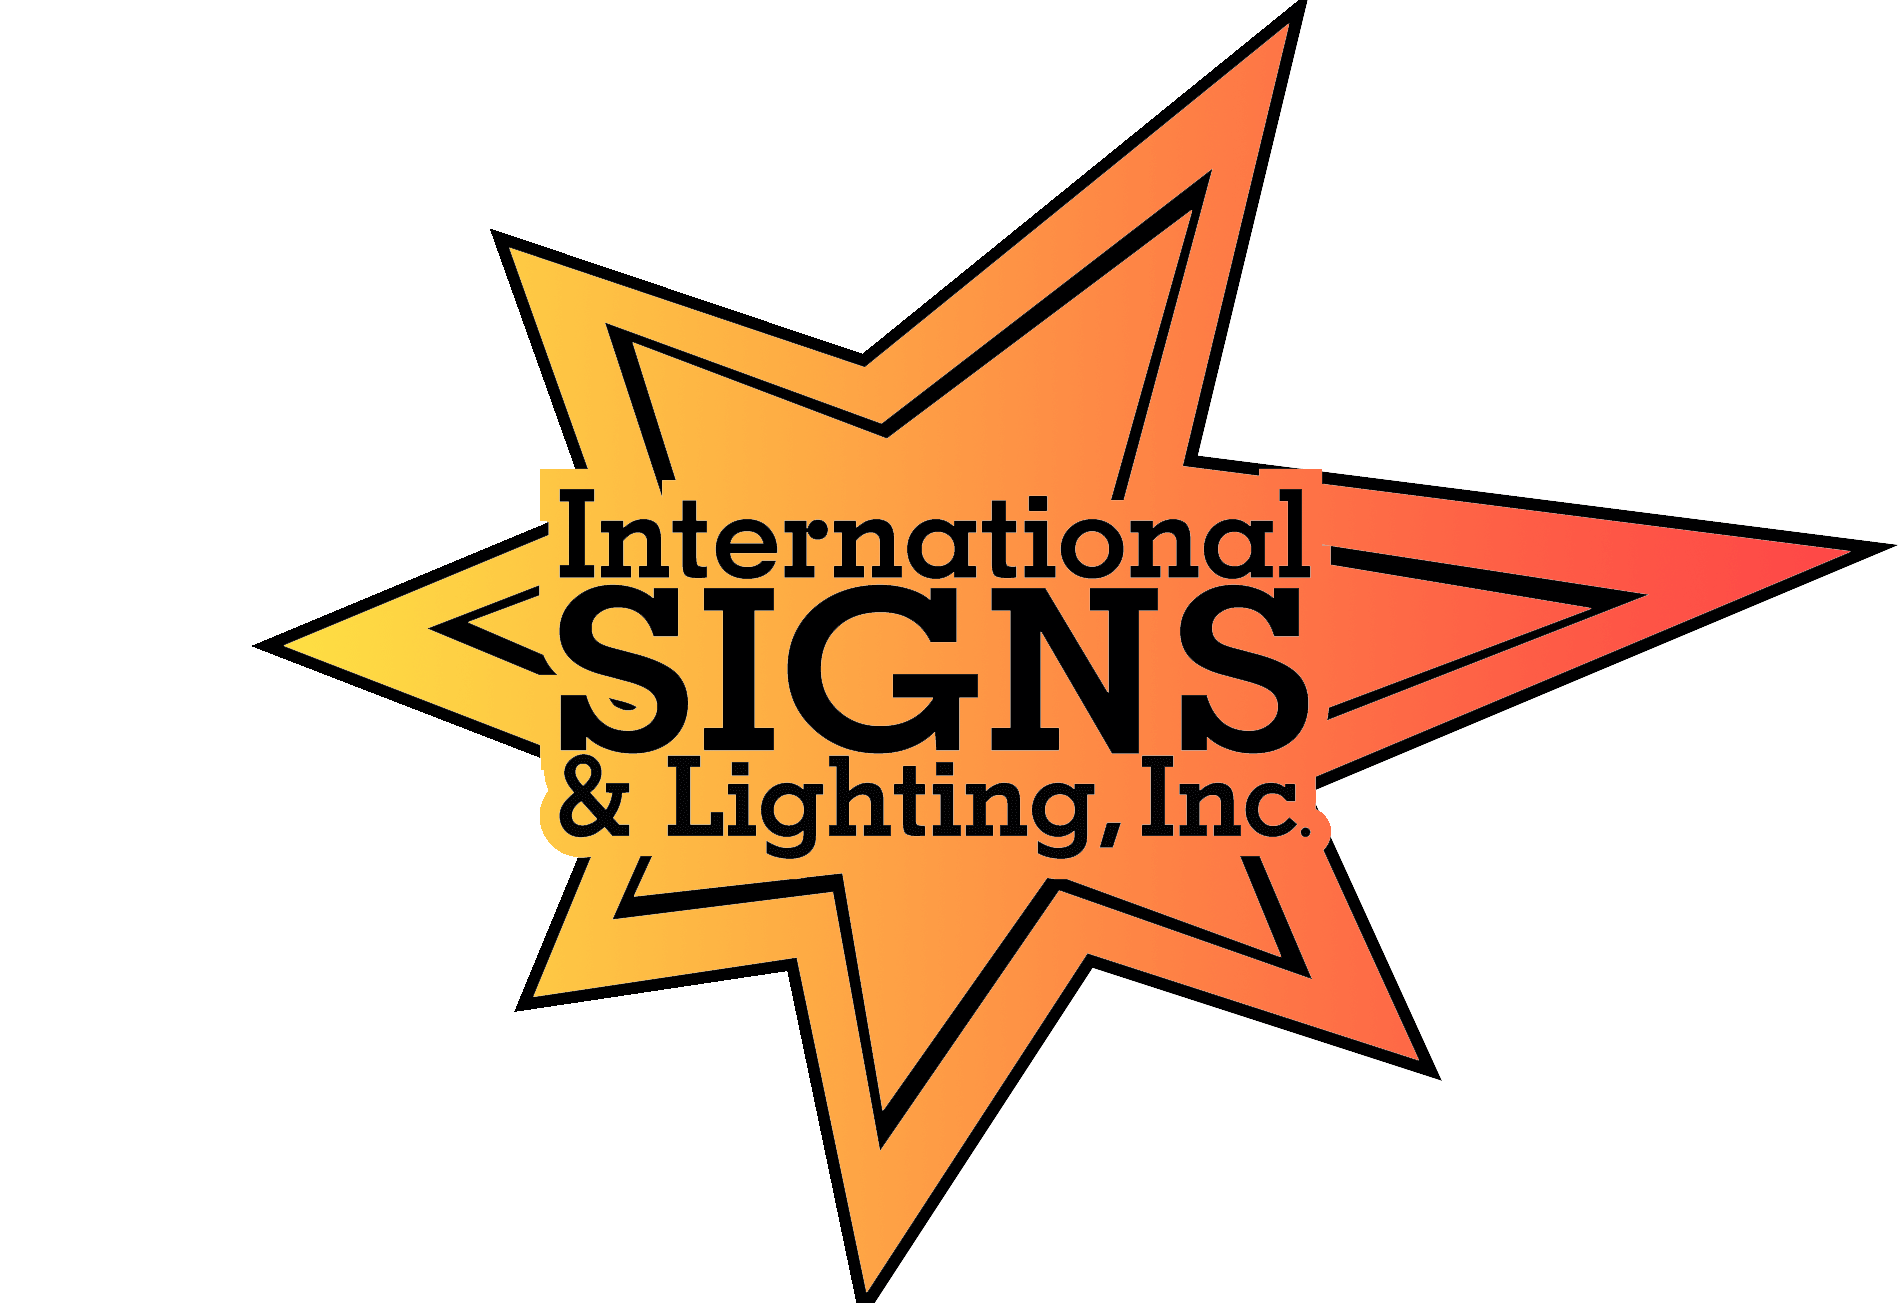 International signs and lighting logo black and white